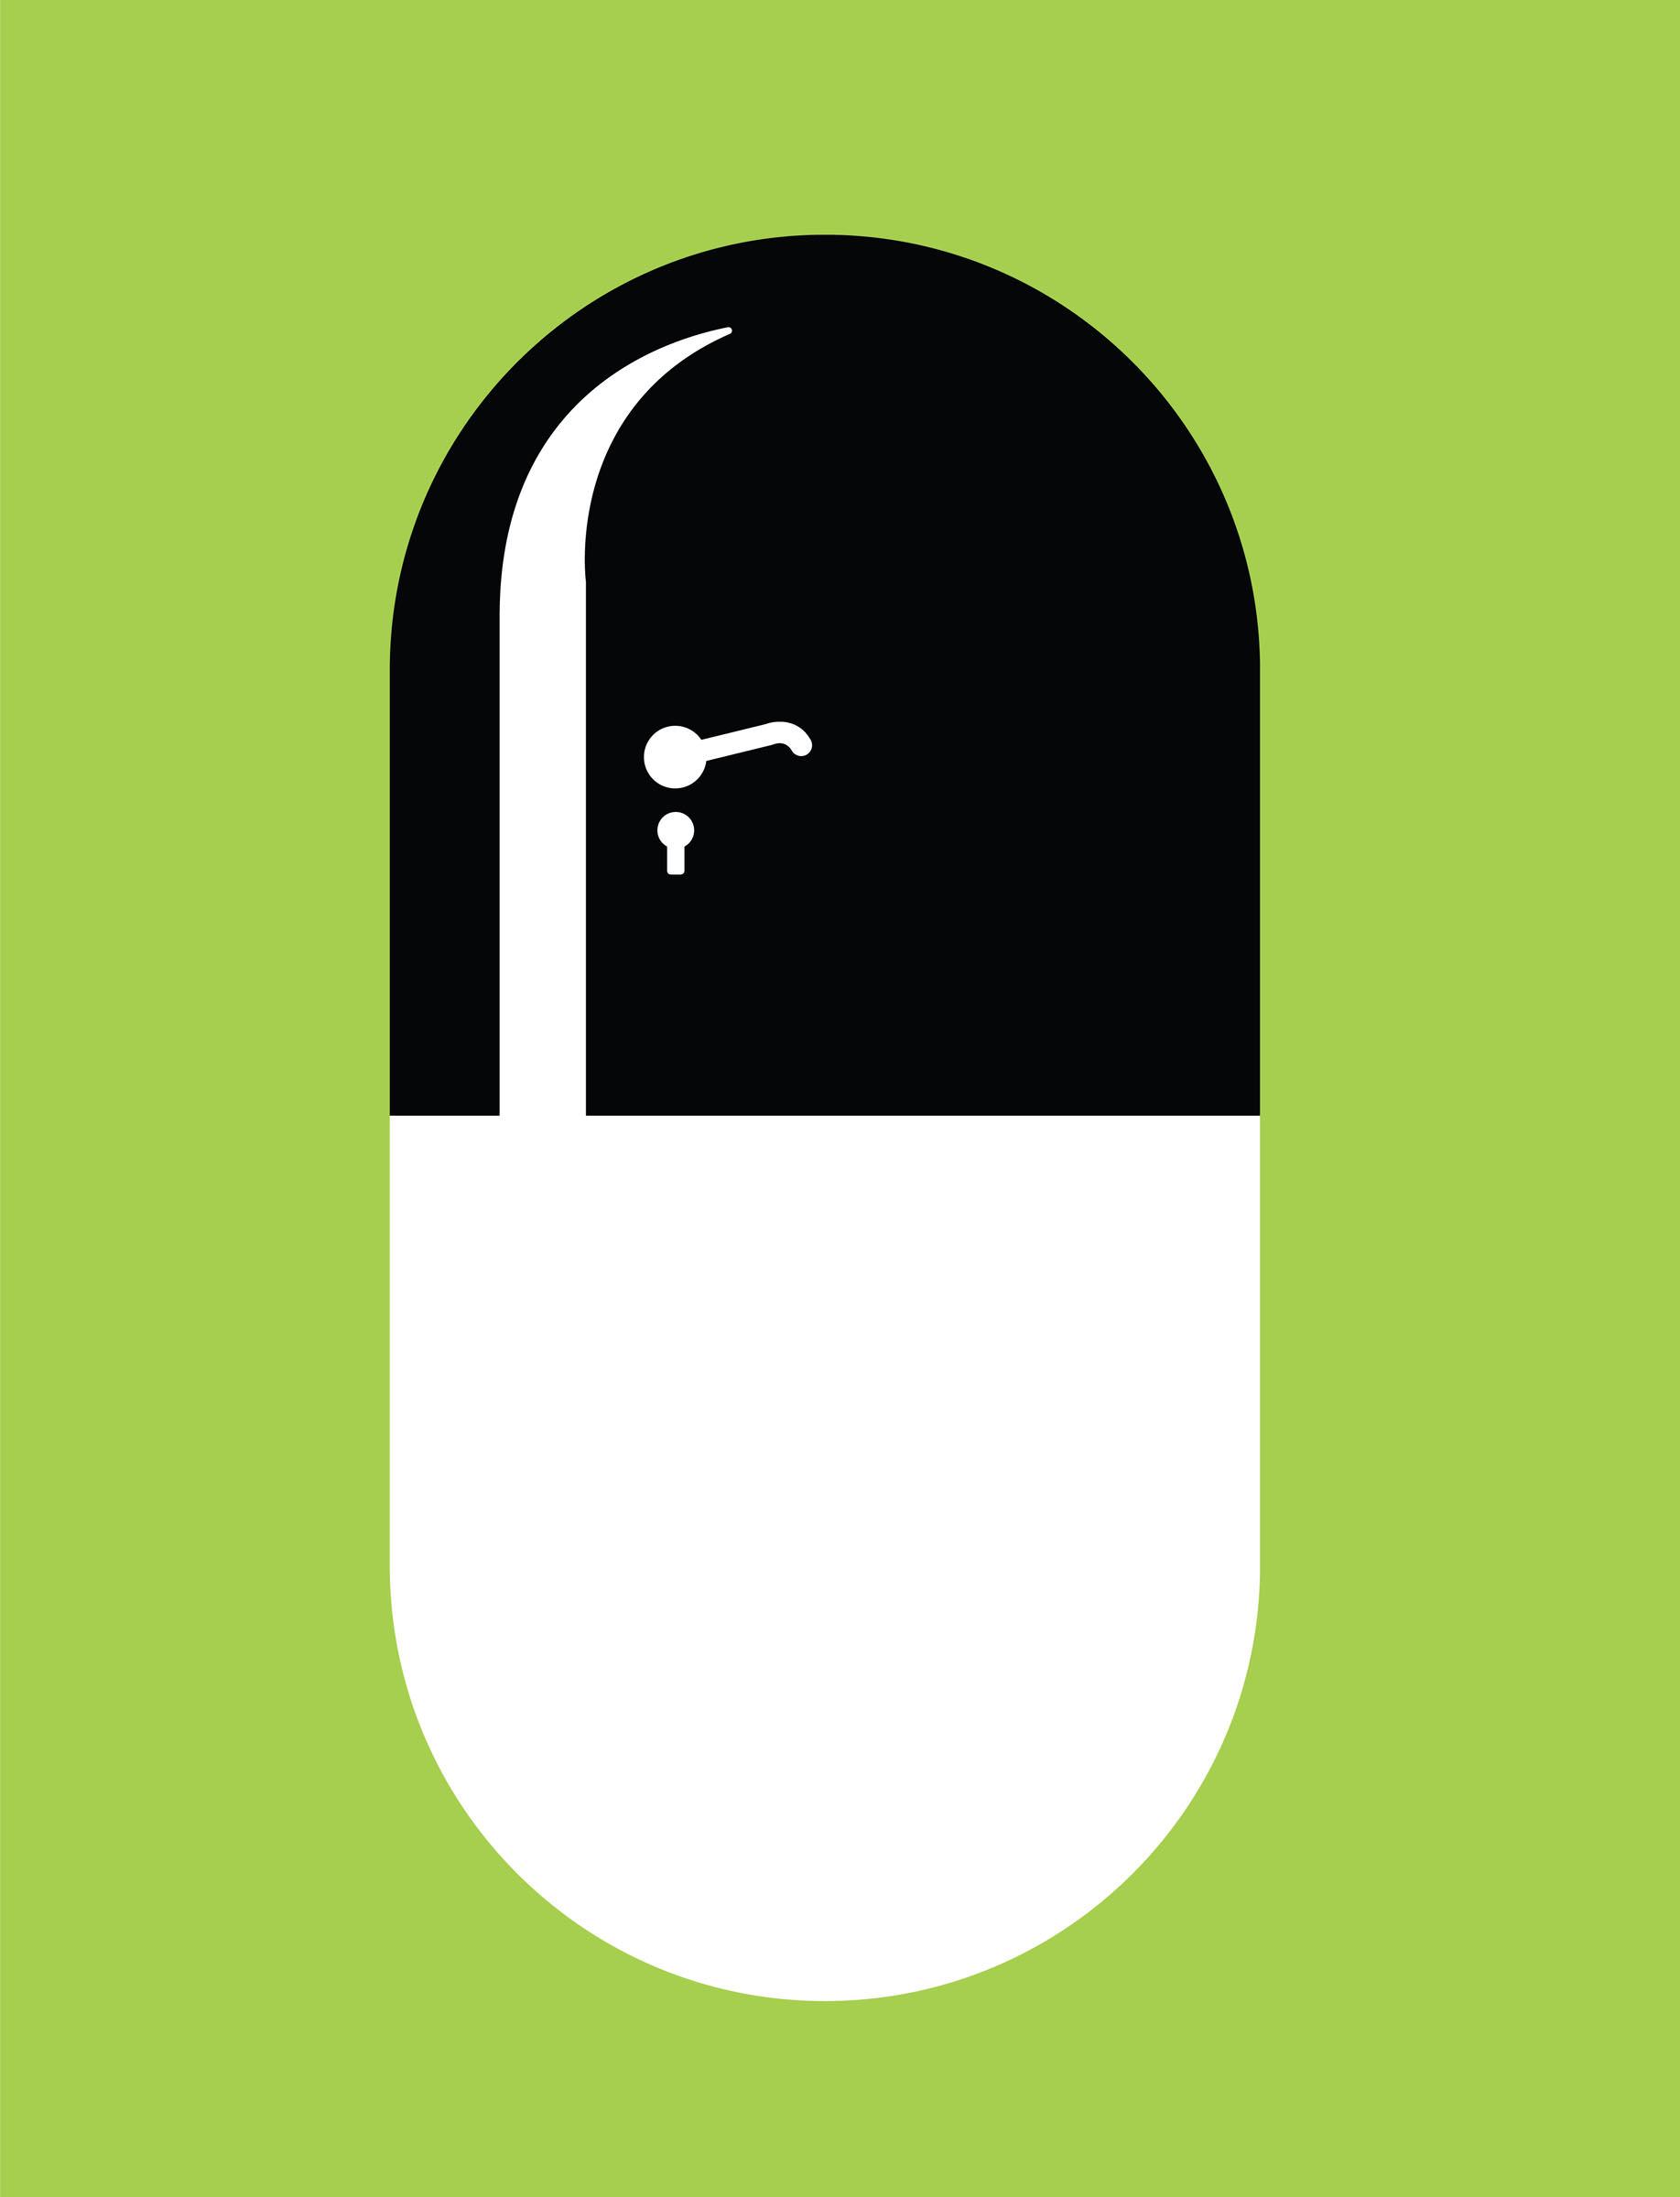 Illustration of black and white pill with shadows giving the illusion of a door opening.